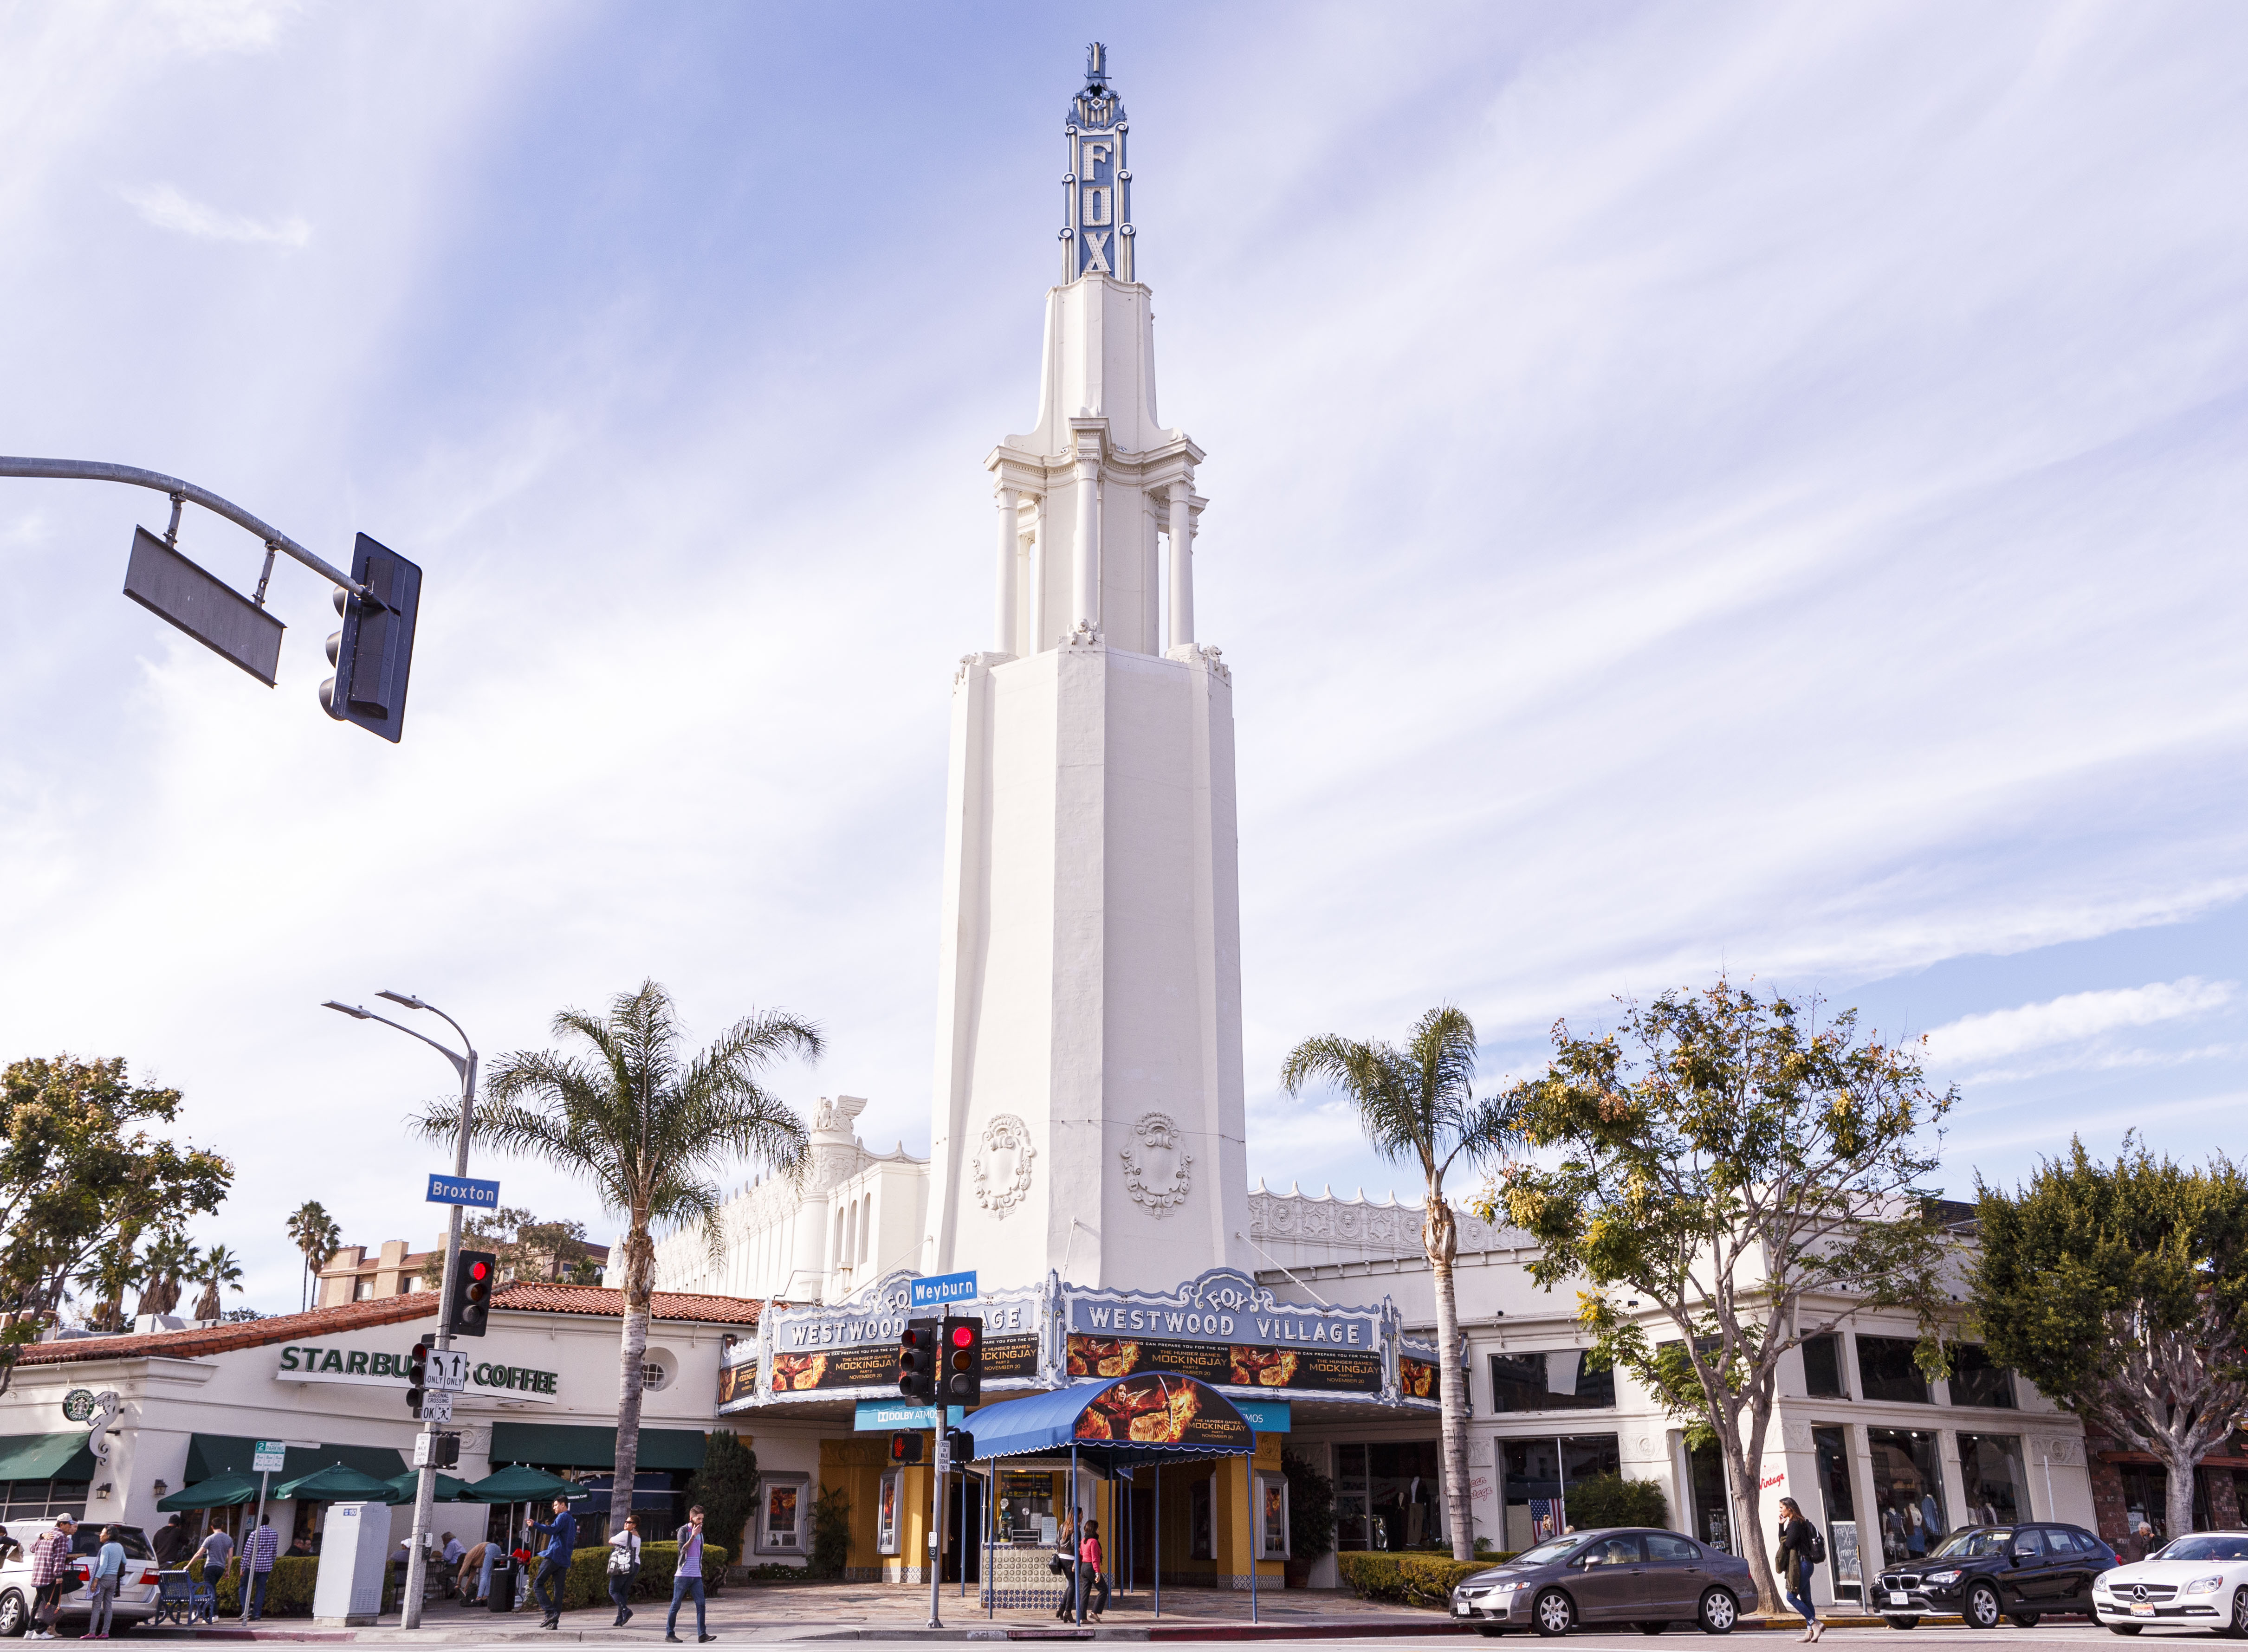 Best Buy to close its Westwood Village location in May - Daily Bruin